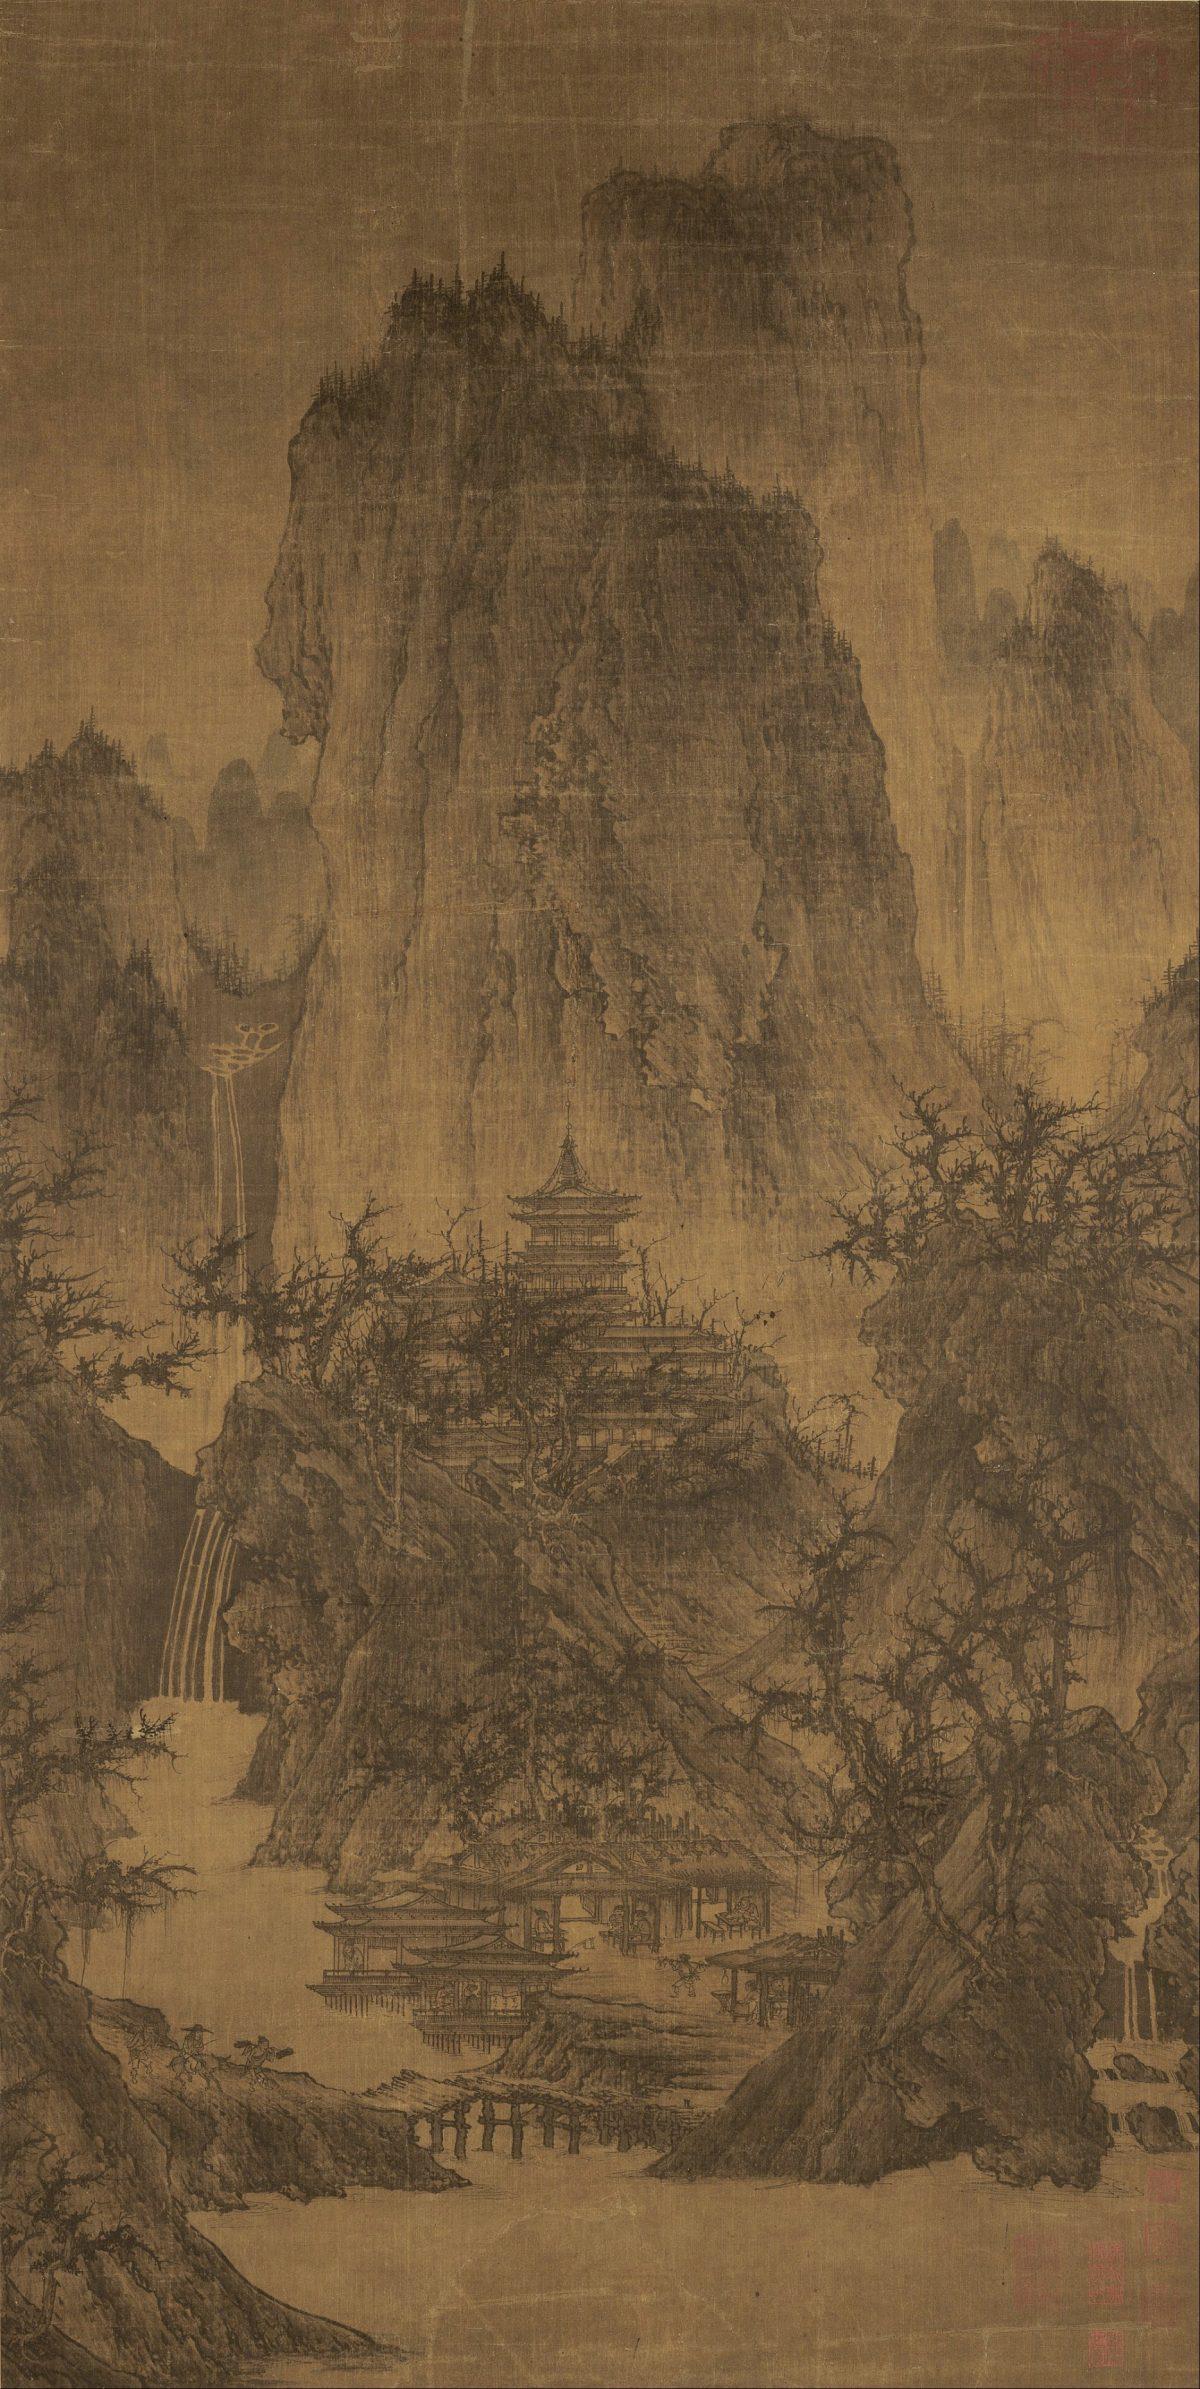 <span data-sheets-value="{"1":2,"2":"\"A Solitary Temple Amid Clearing Peaks\" by Li Cheng. Hanging scroll with ink on silk, 44 inches by 22 inches. The Nelson-Atkins Museum of Art, Kansas City, Mo. (Public Domain)"}" data-sheets-userformat="{"2":15107,"3":{"1":0},"4":[null,2,16776960],"11":4,"12":0,"14":[null,2,2171169],"15":"\"Trebuchet MS\",Arial,Helvetica,sans-serif","16":12}">"A Solitary Temple Amid Clearing Peaks" by Li Cheng. Hanging scroll with ink on silk, 44 inches by 22 inches. The Nelson-Atkins Museum of Art, Kansas City, Mo. (Public Domain)</span>